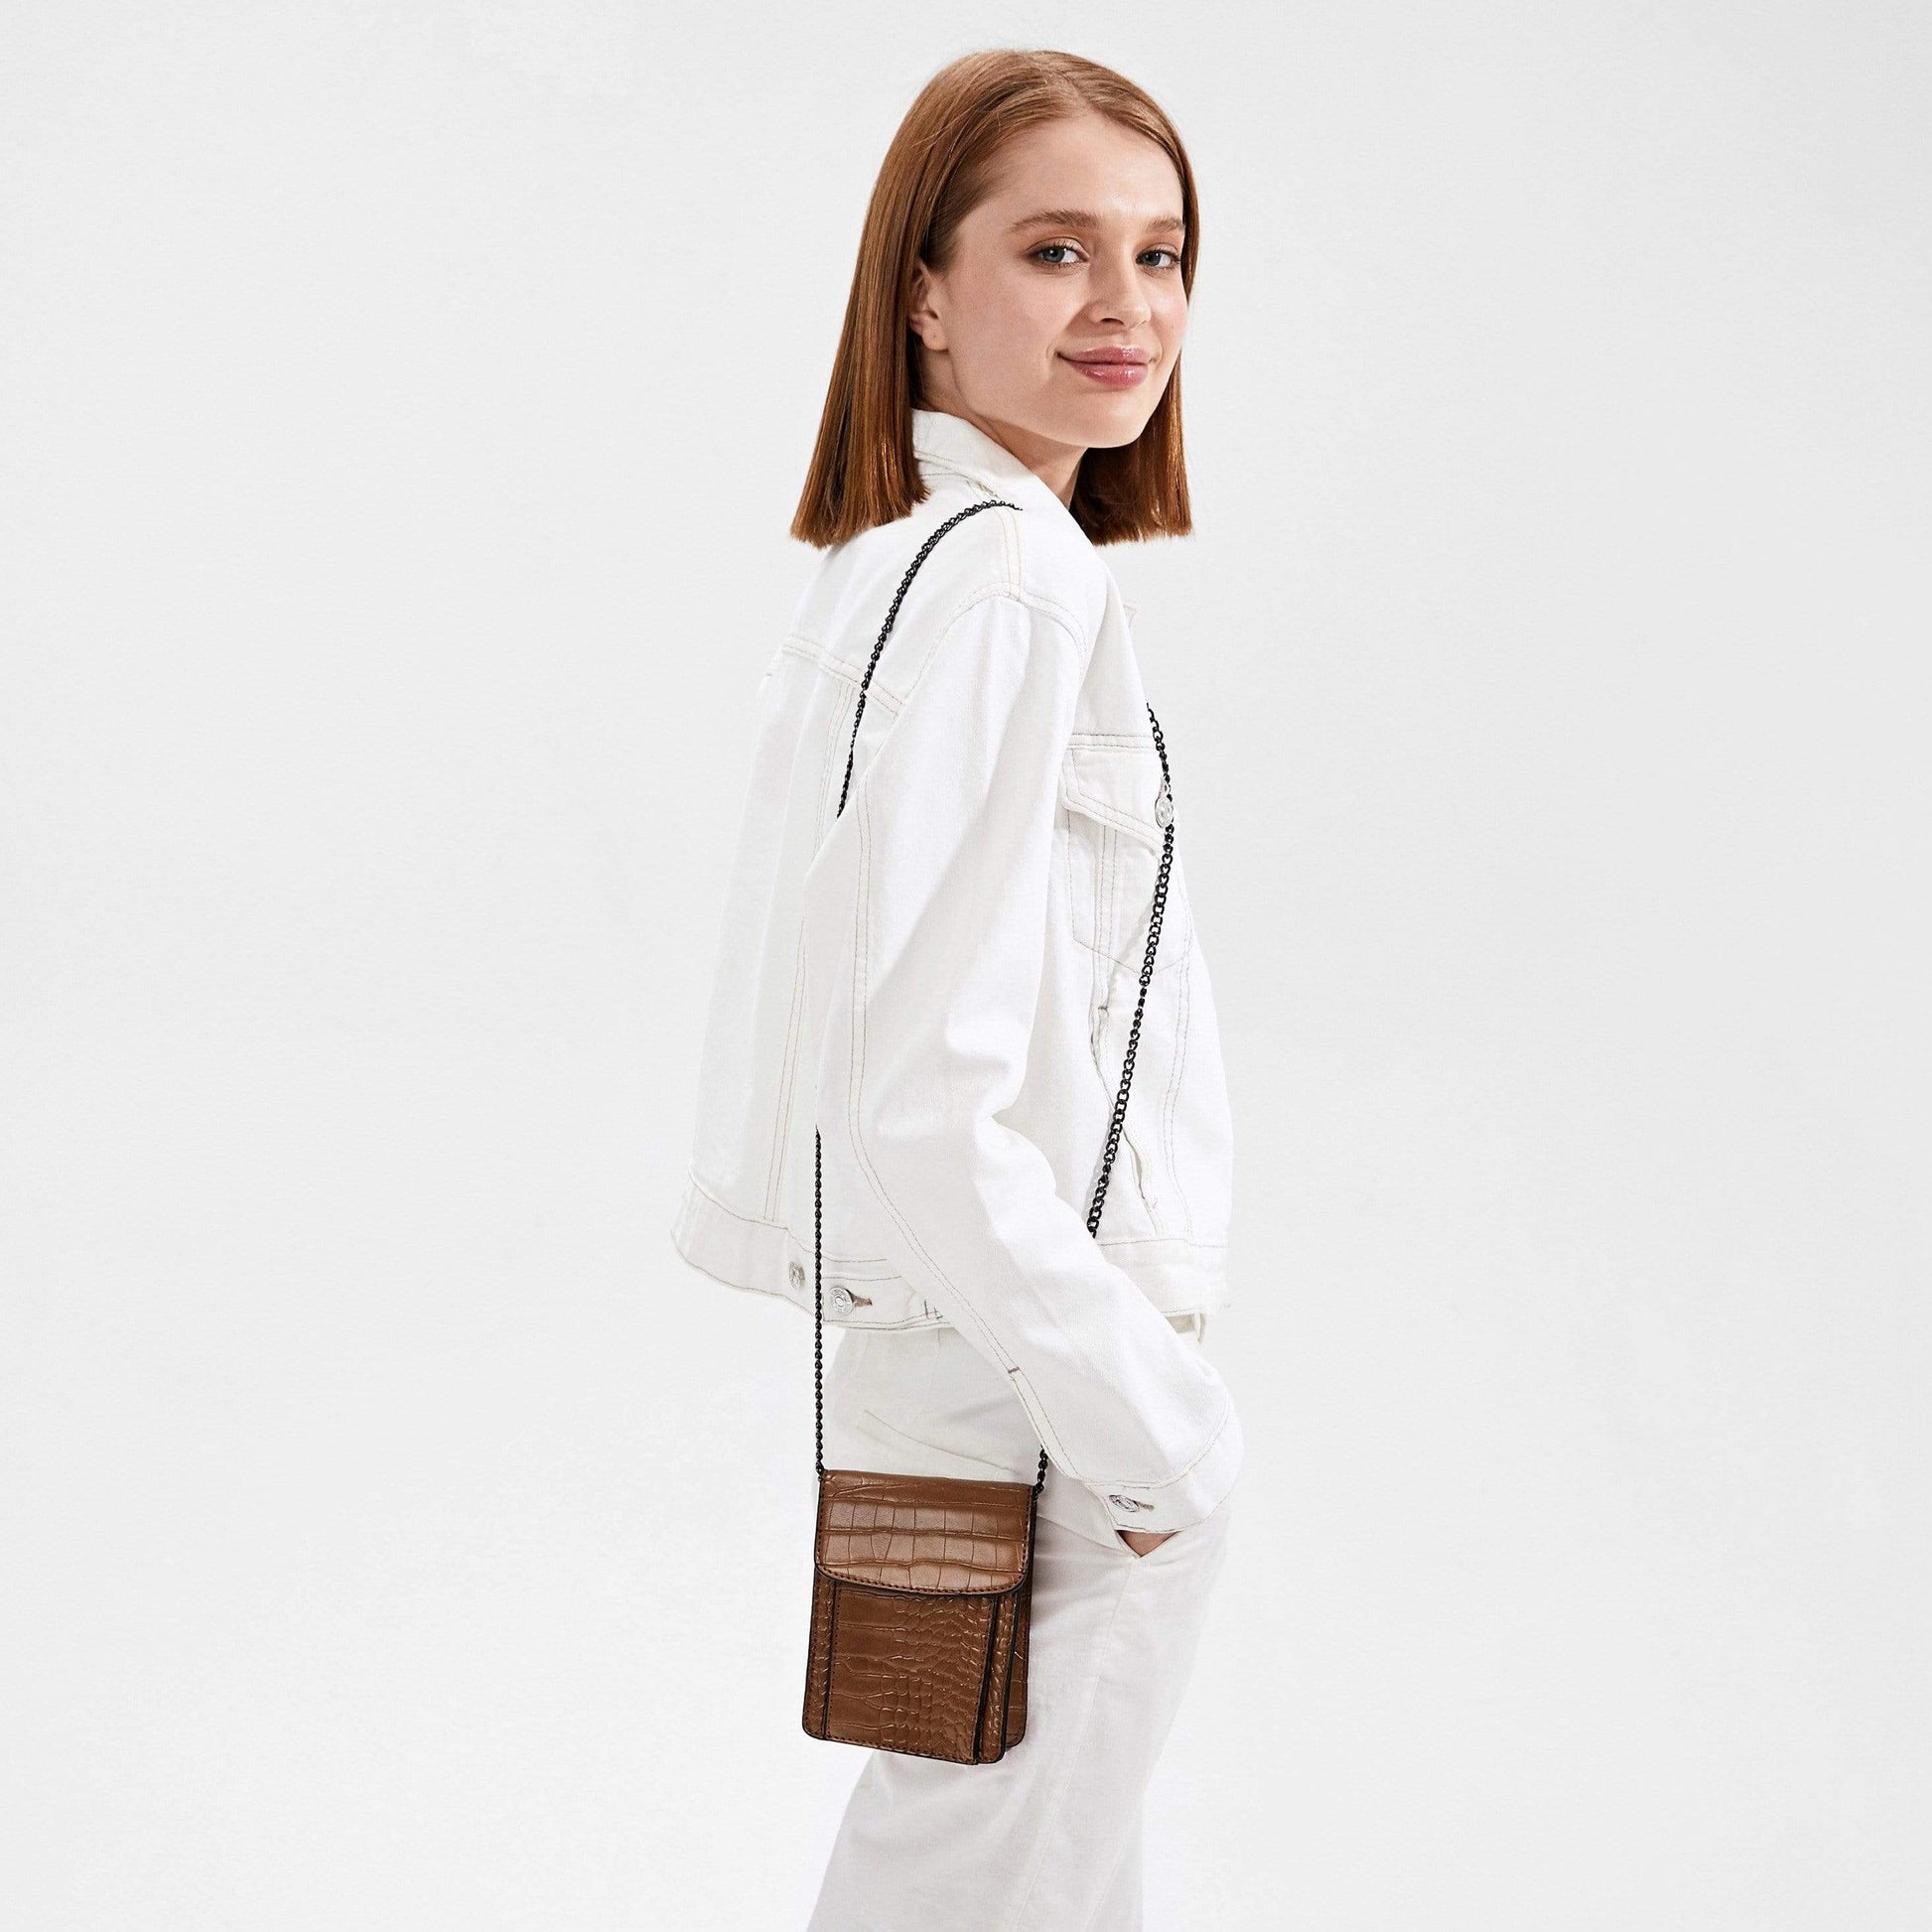 Woman in white wearing a bron shoulder bag.